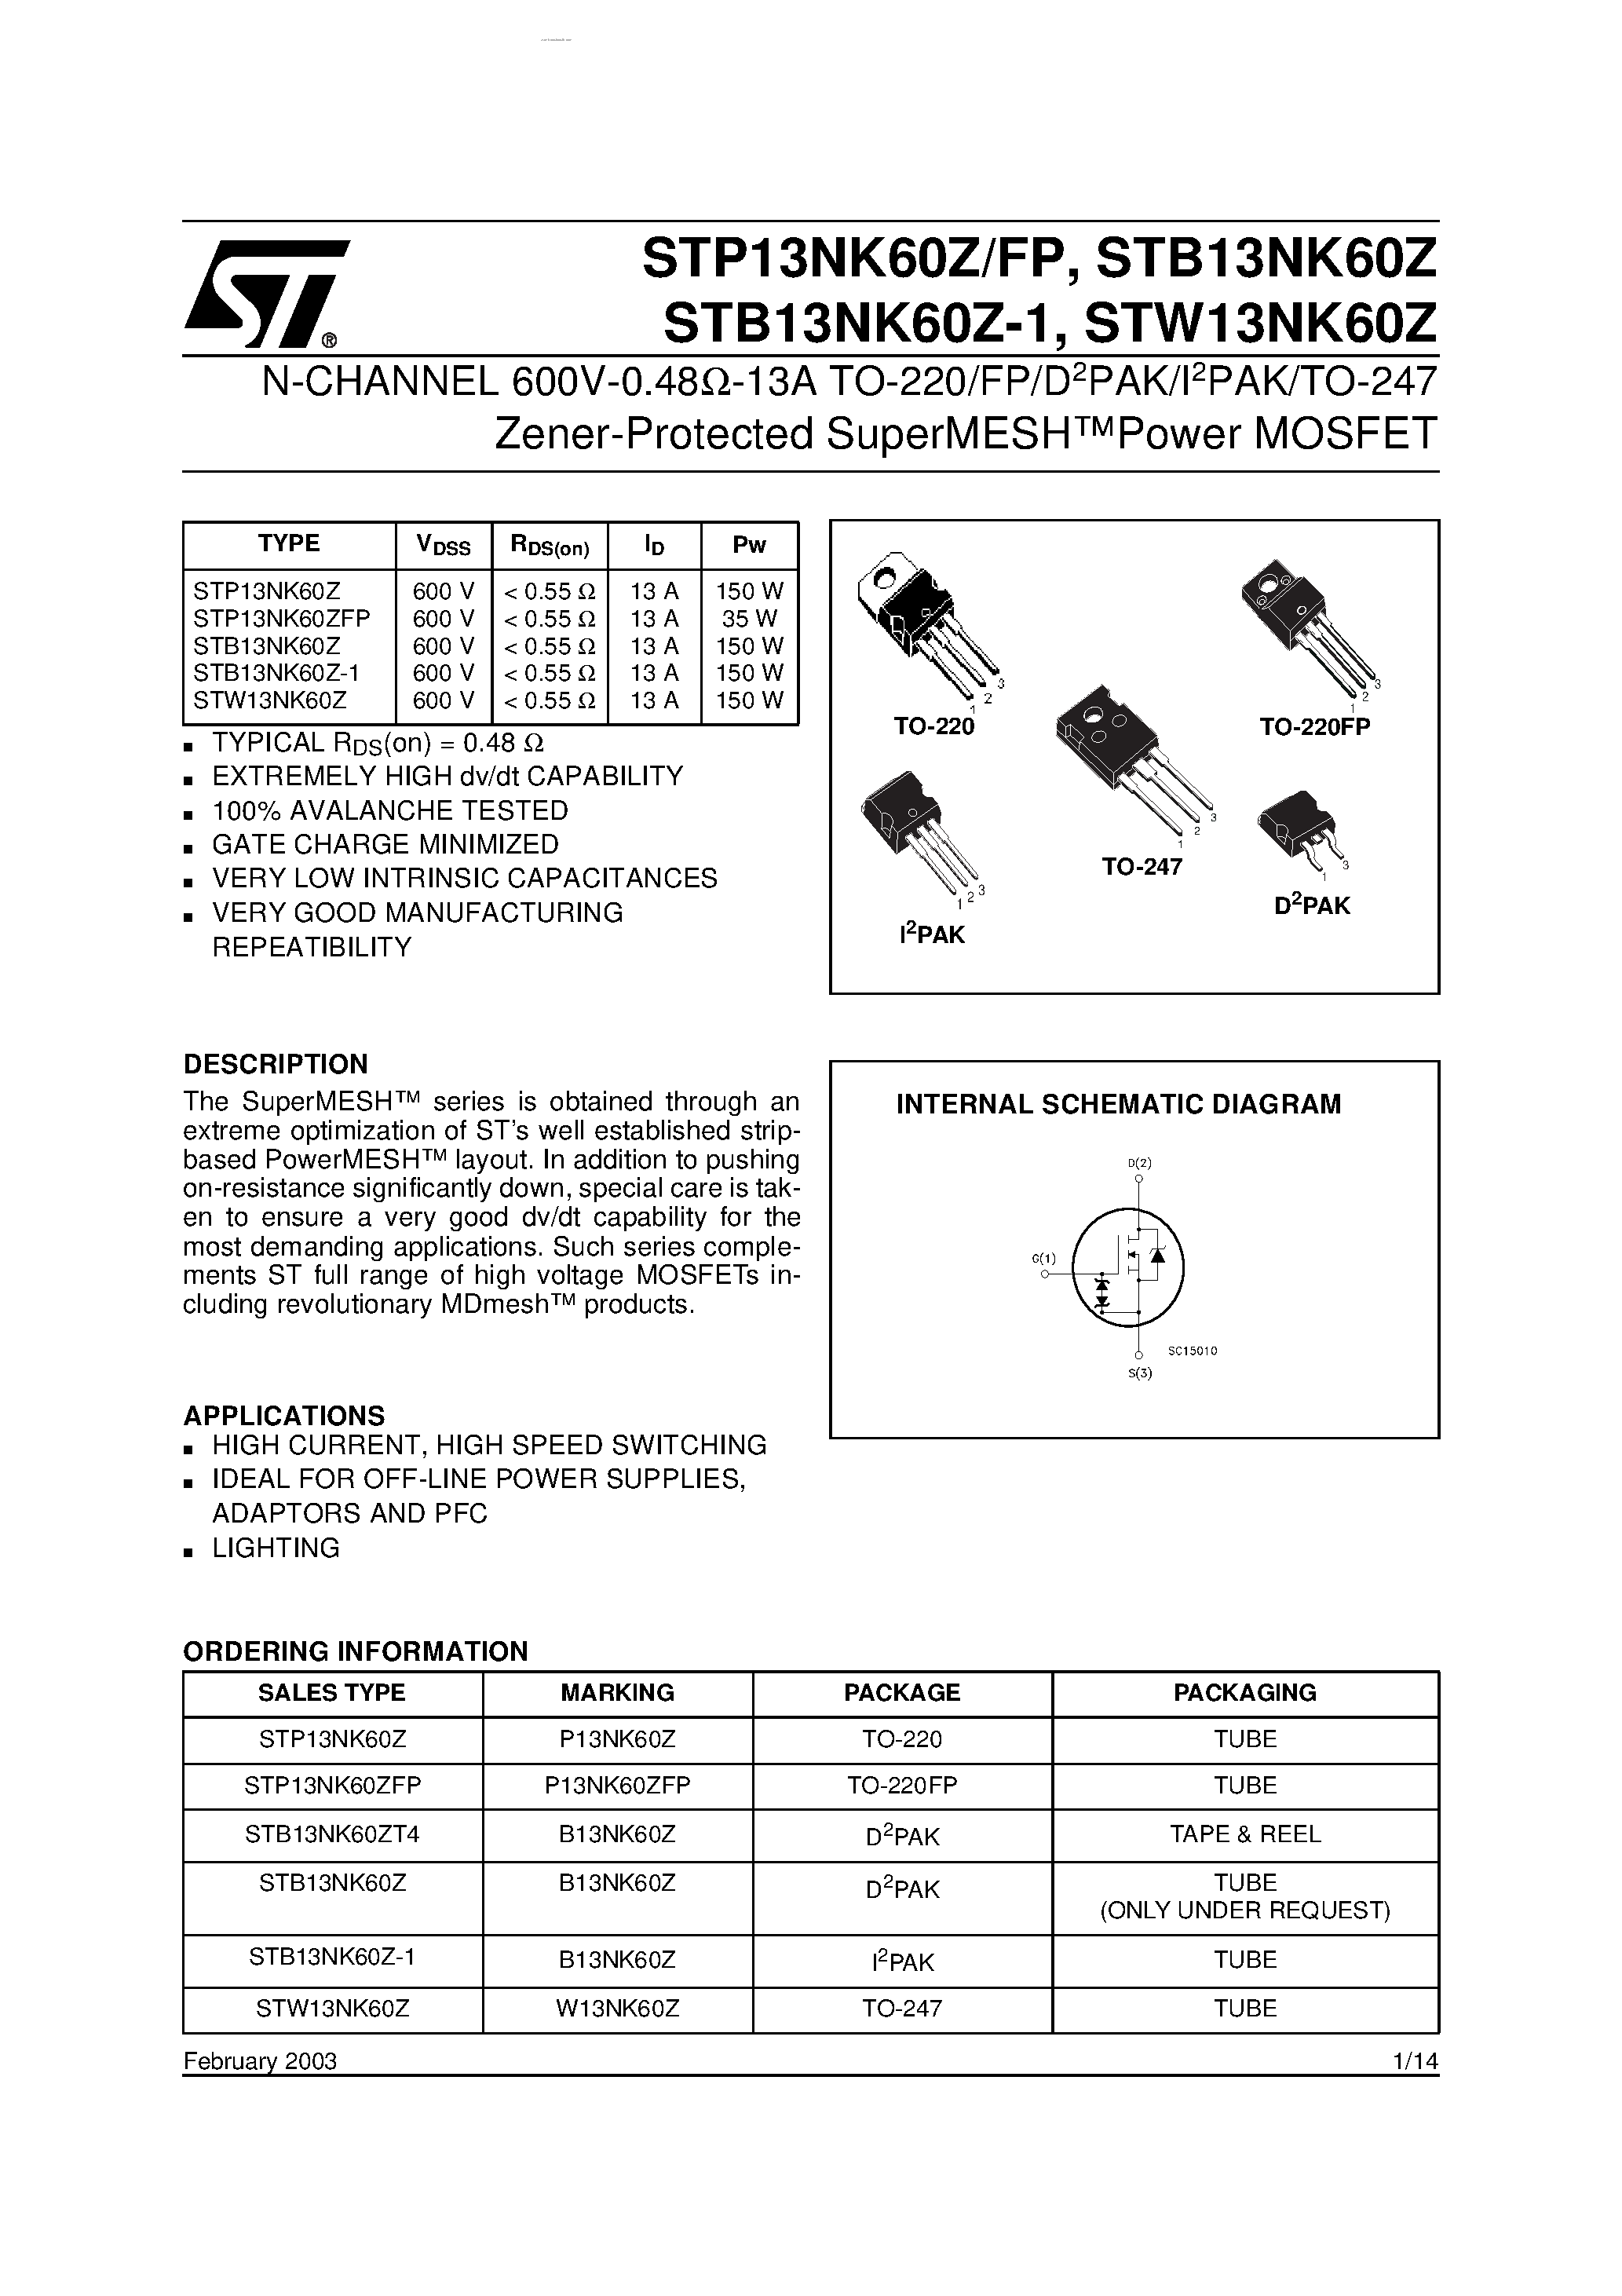 Datasheet STP13NK60FP - N-channel Power MOSFET page 1